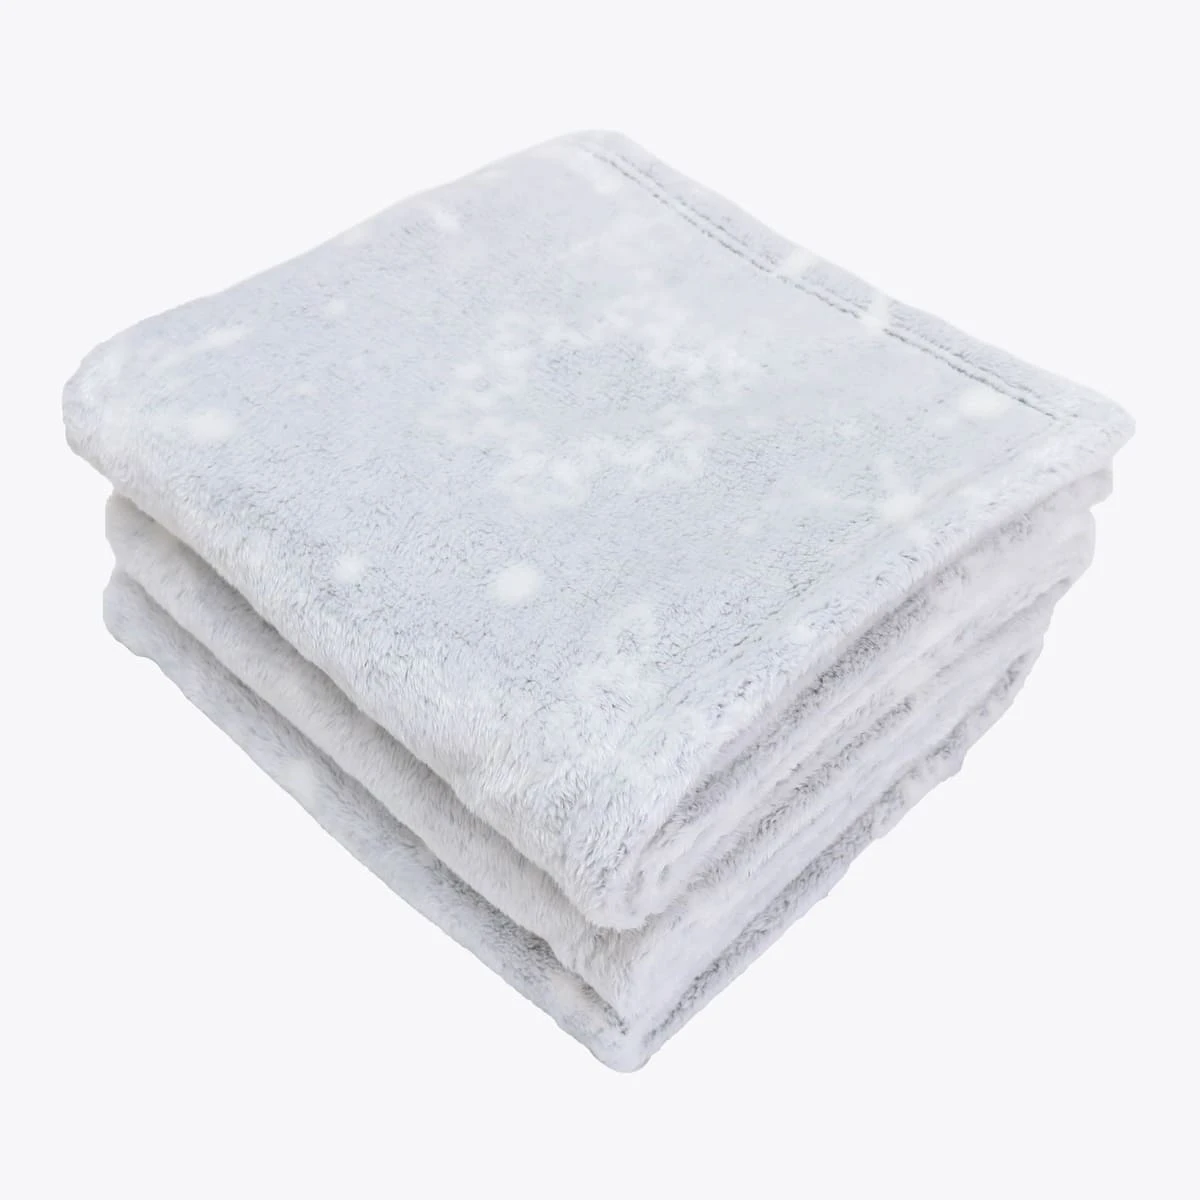 Snowflake Printed Frosted Plush Blanket (Silver Grey)